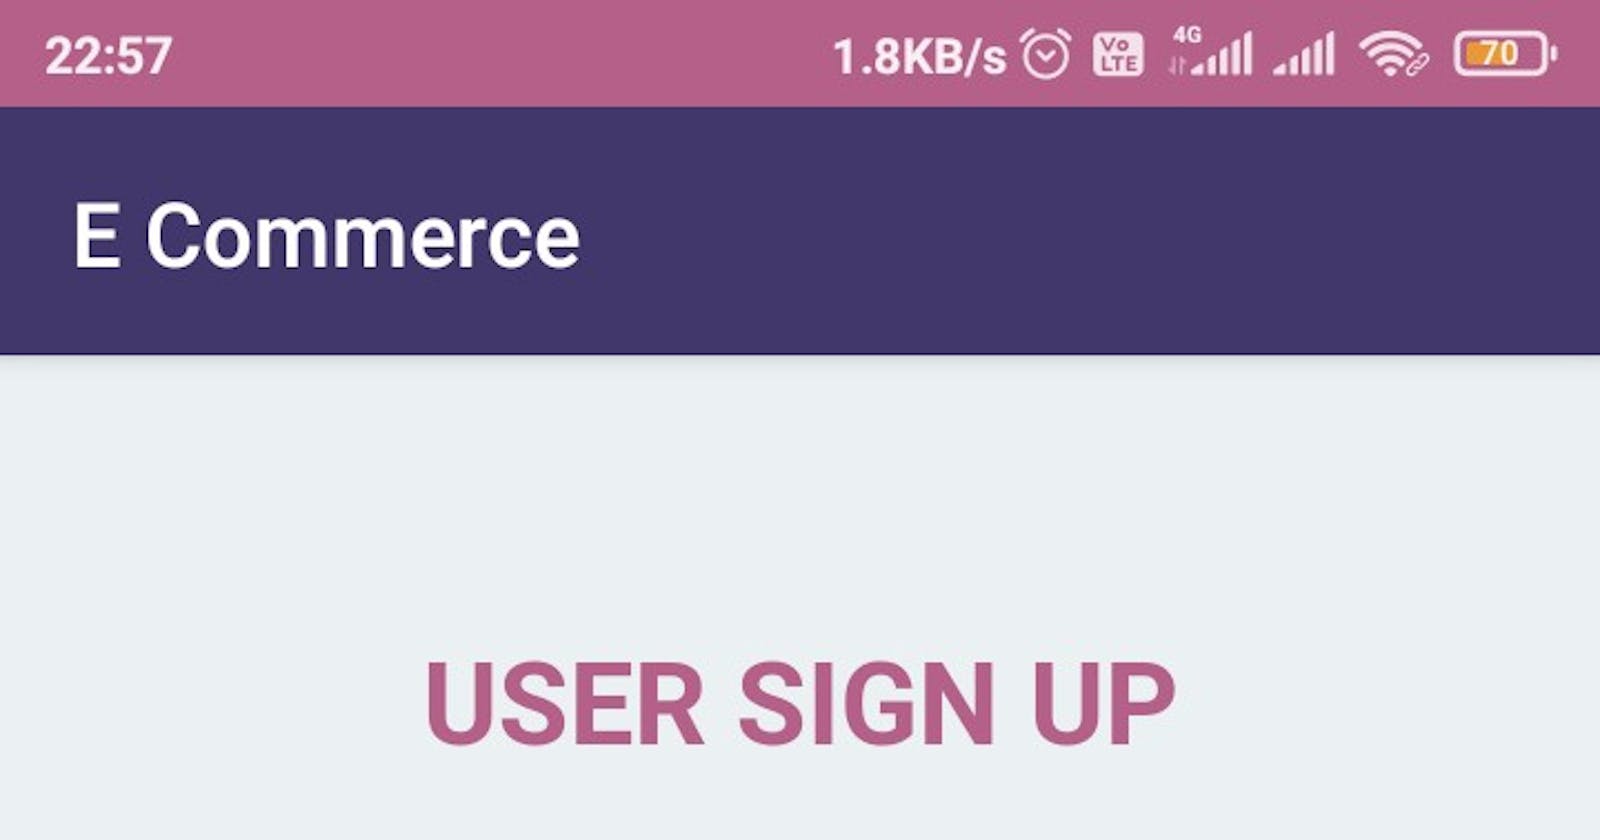 Let’s Build Signup, SignIn, and Role-Based Access in Our E-Commerce App